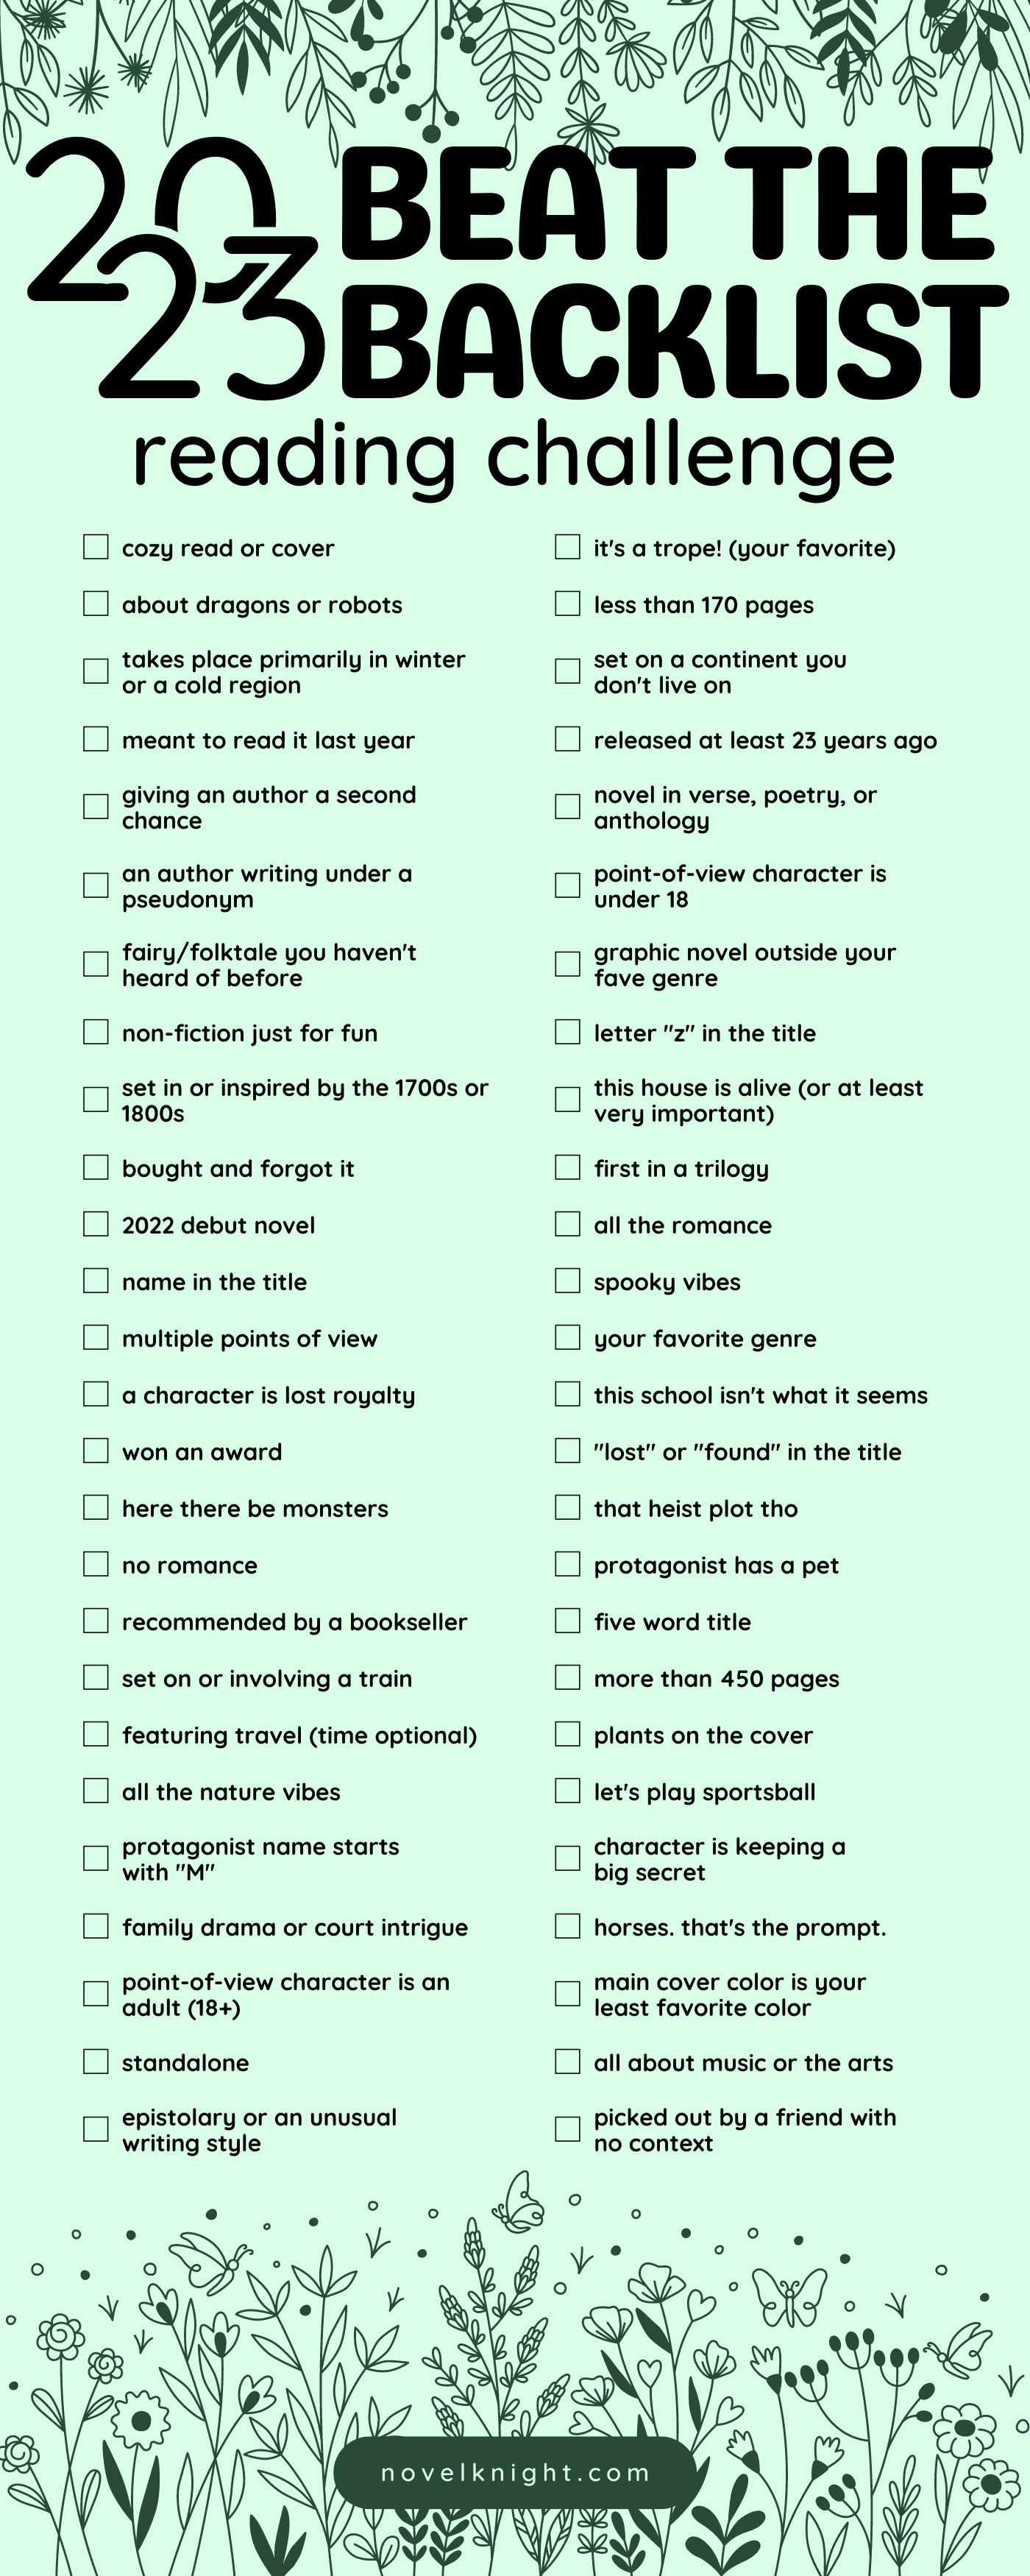 List of 52 reading prompts for the Beat the Backlist reading challenge.